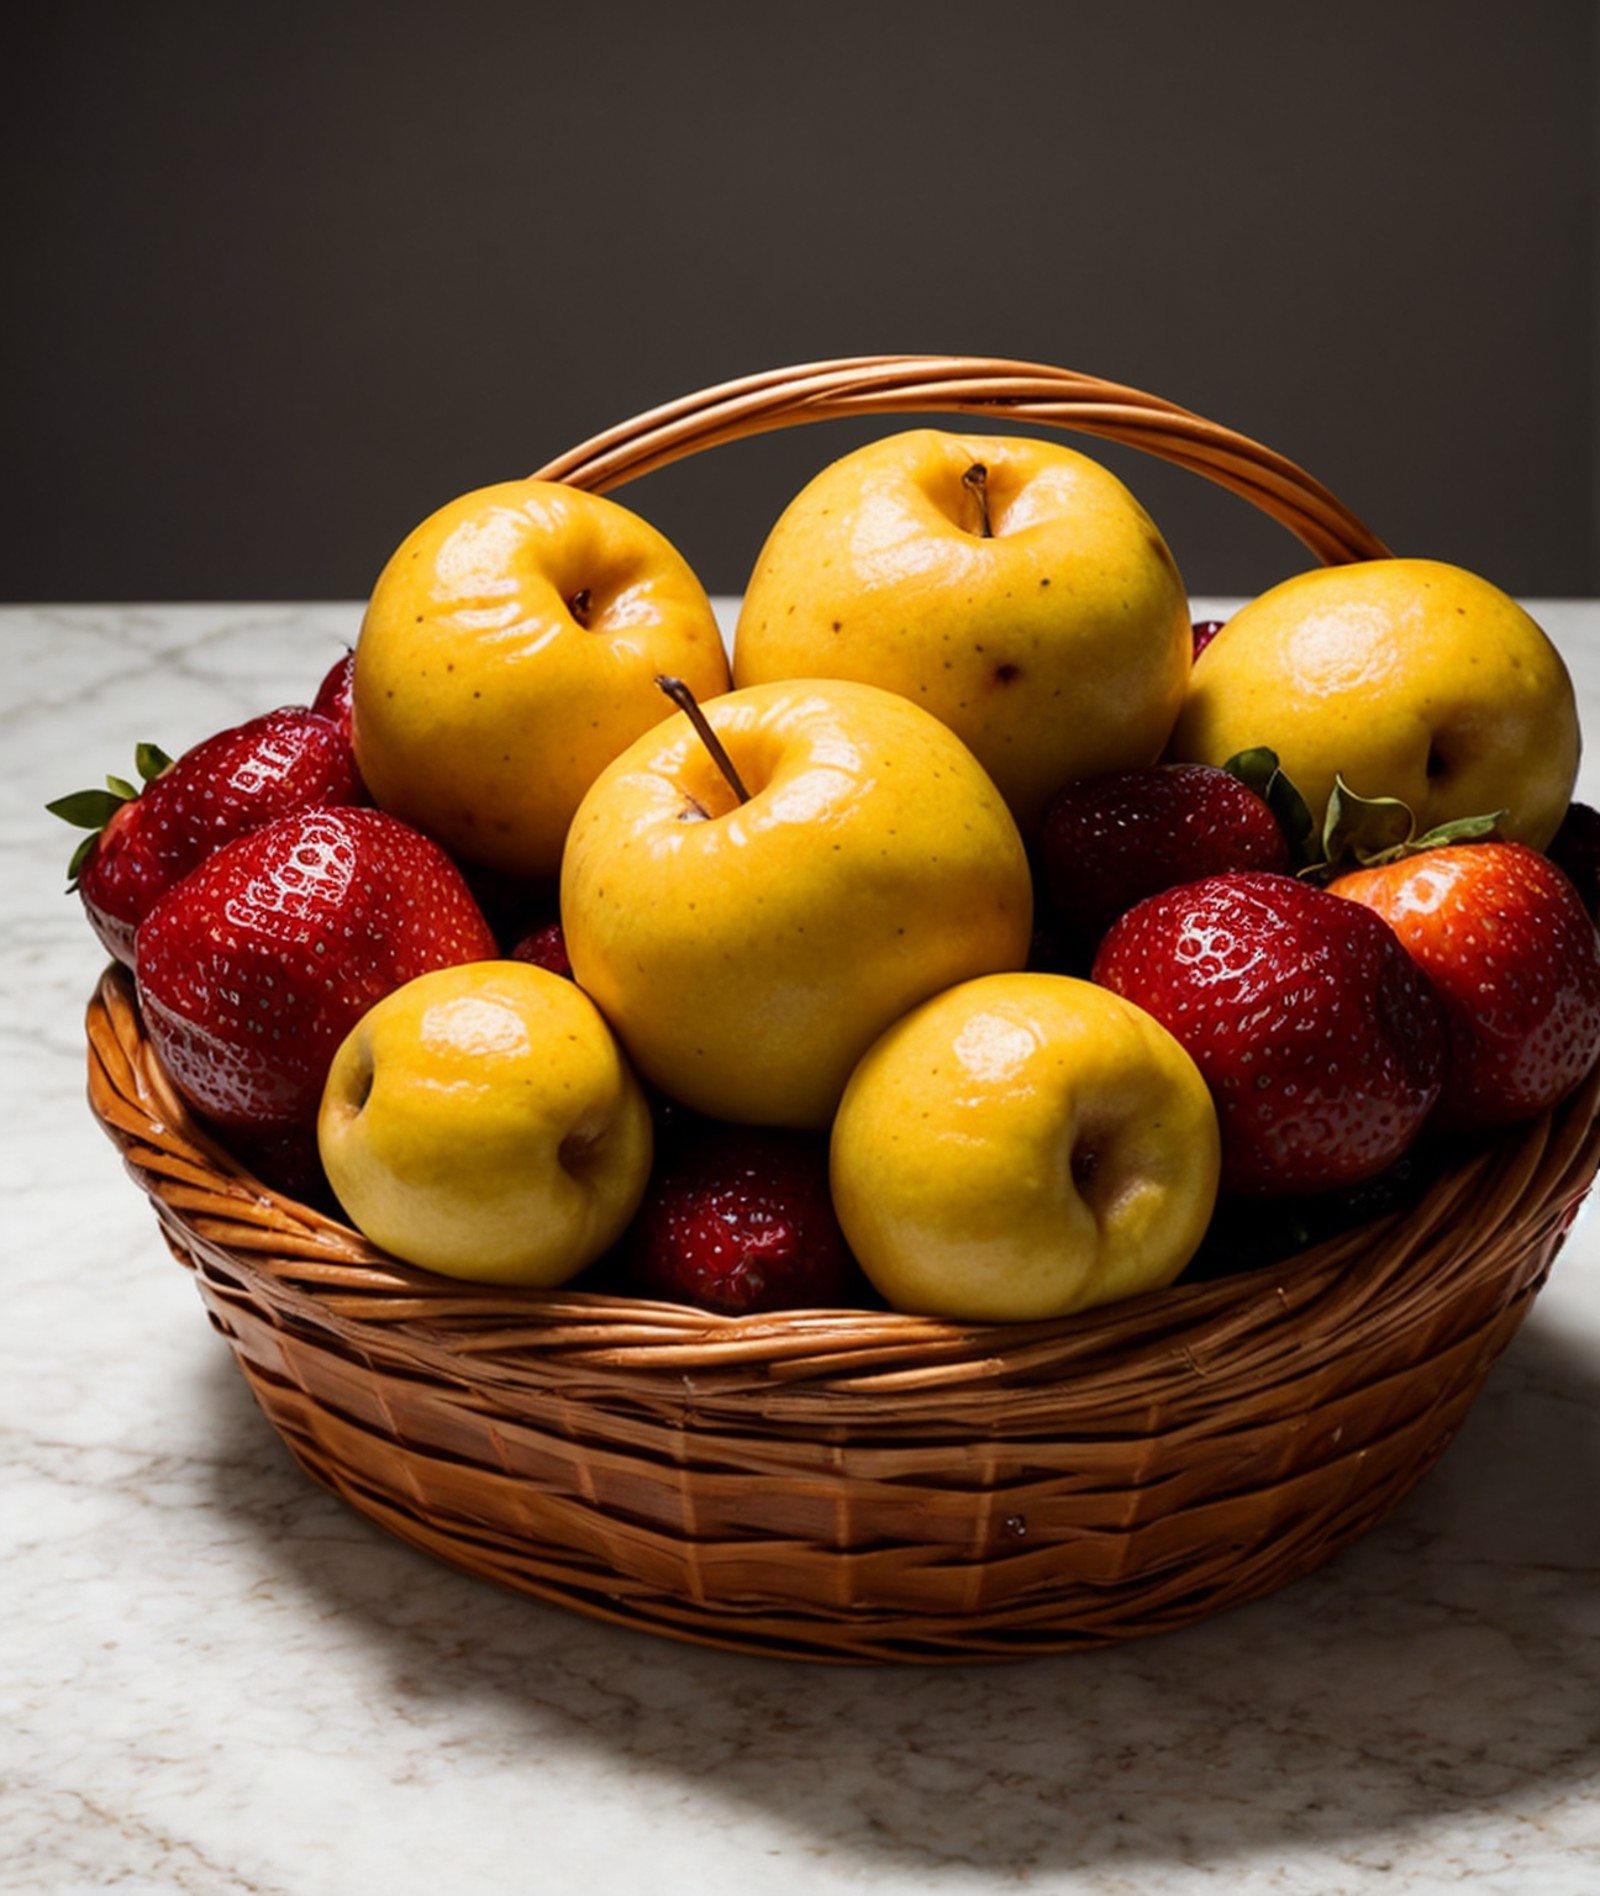 cinematic photo photo, Food photography style Food photography style a basket full of marble fruit with eyes, ray tracing ...